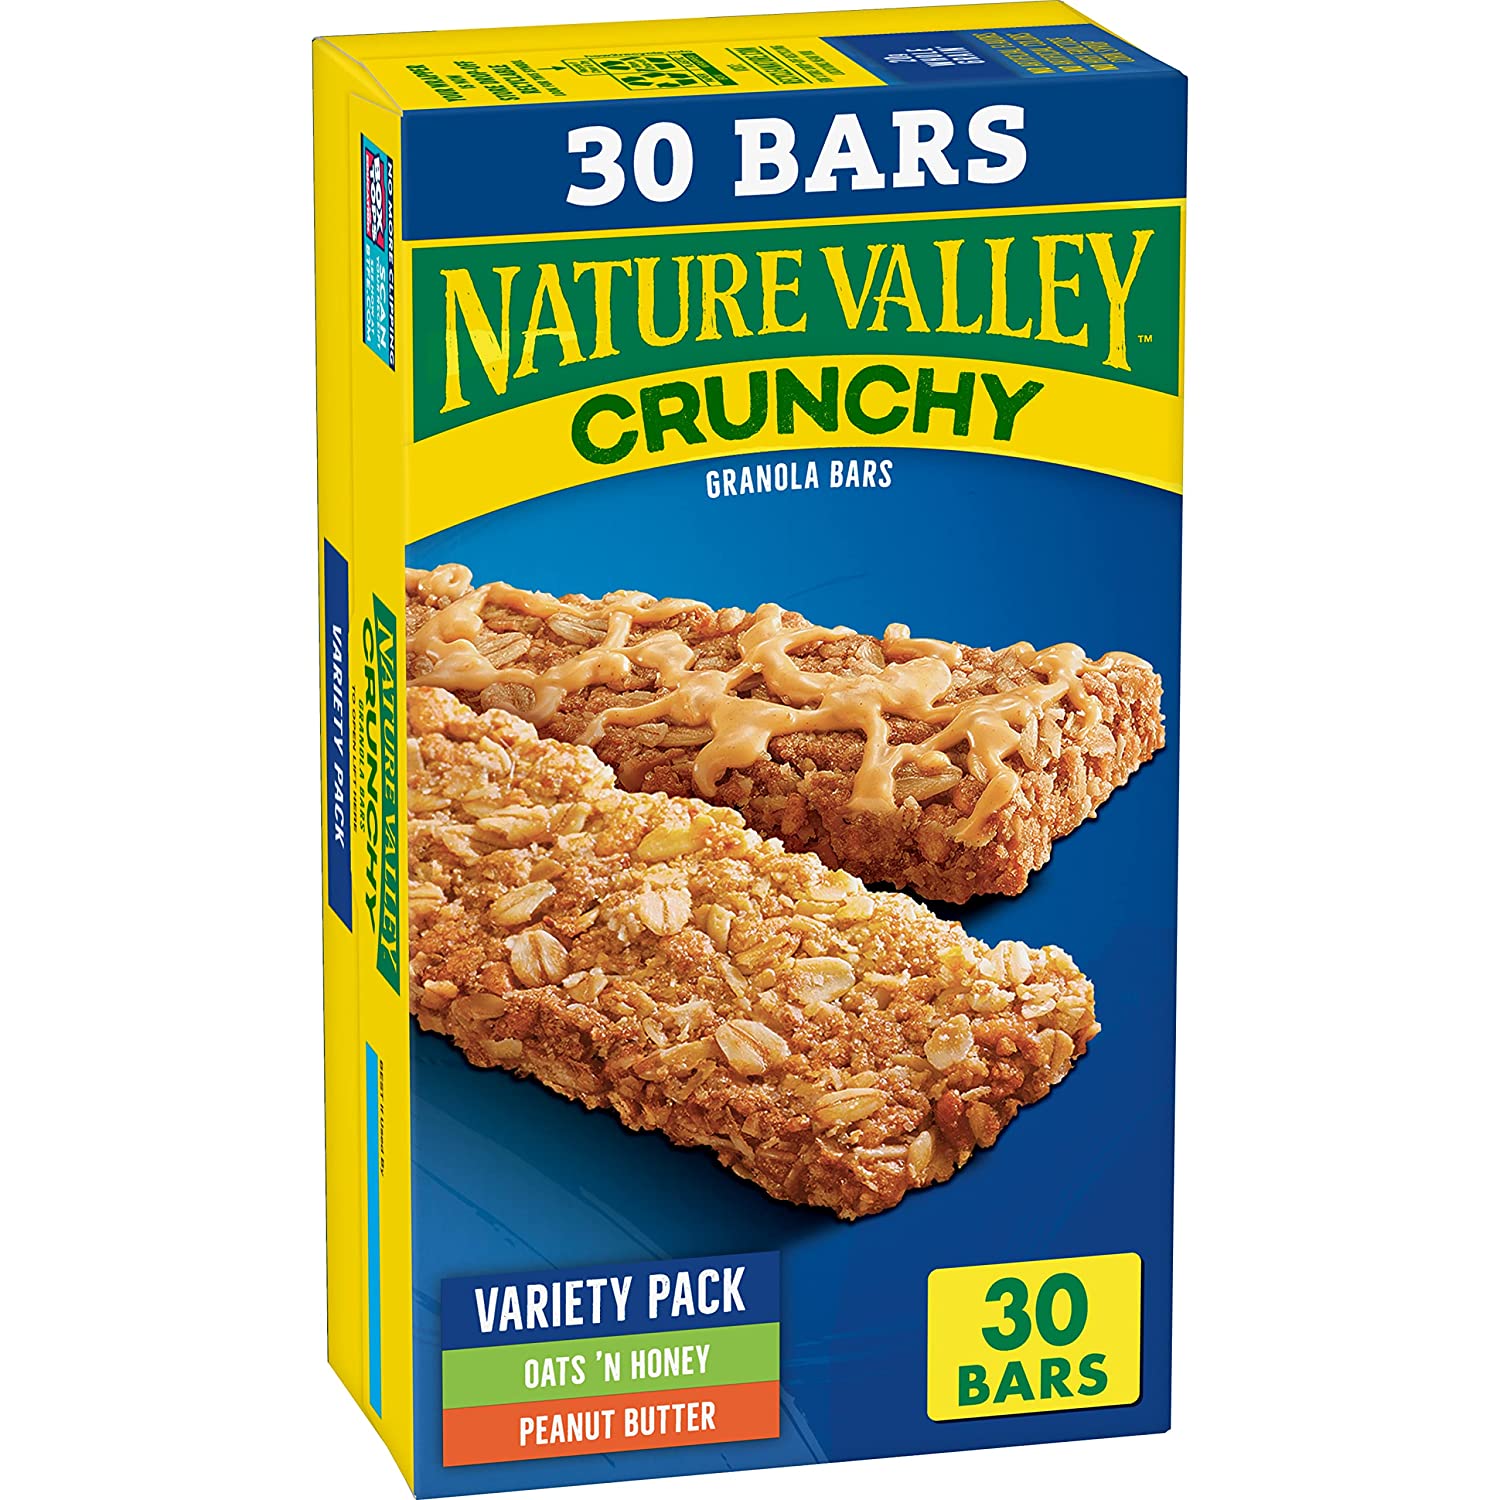 15-Count 1.49-Oz Nature Valley Crunchy Granola Bars (Oats 'n Honey & Peanut Butter) $5.70 w/ S&S + Free Shipping w/ Prime or on orders over $25 $5.35